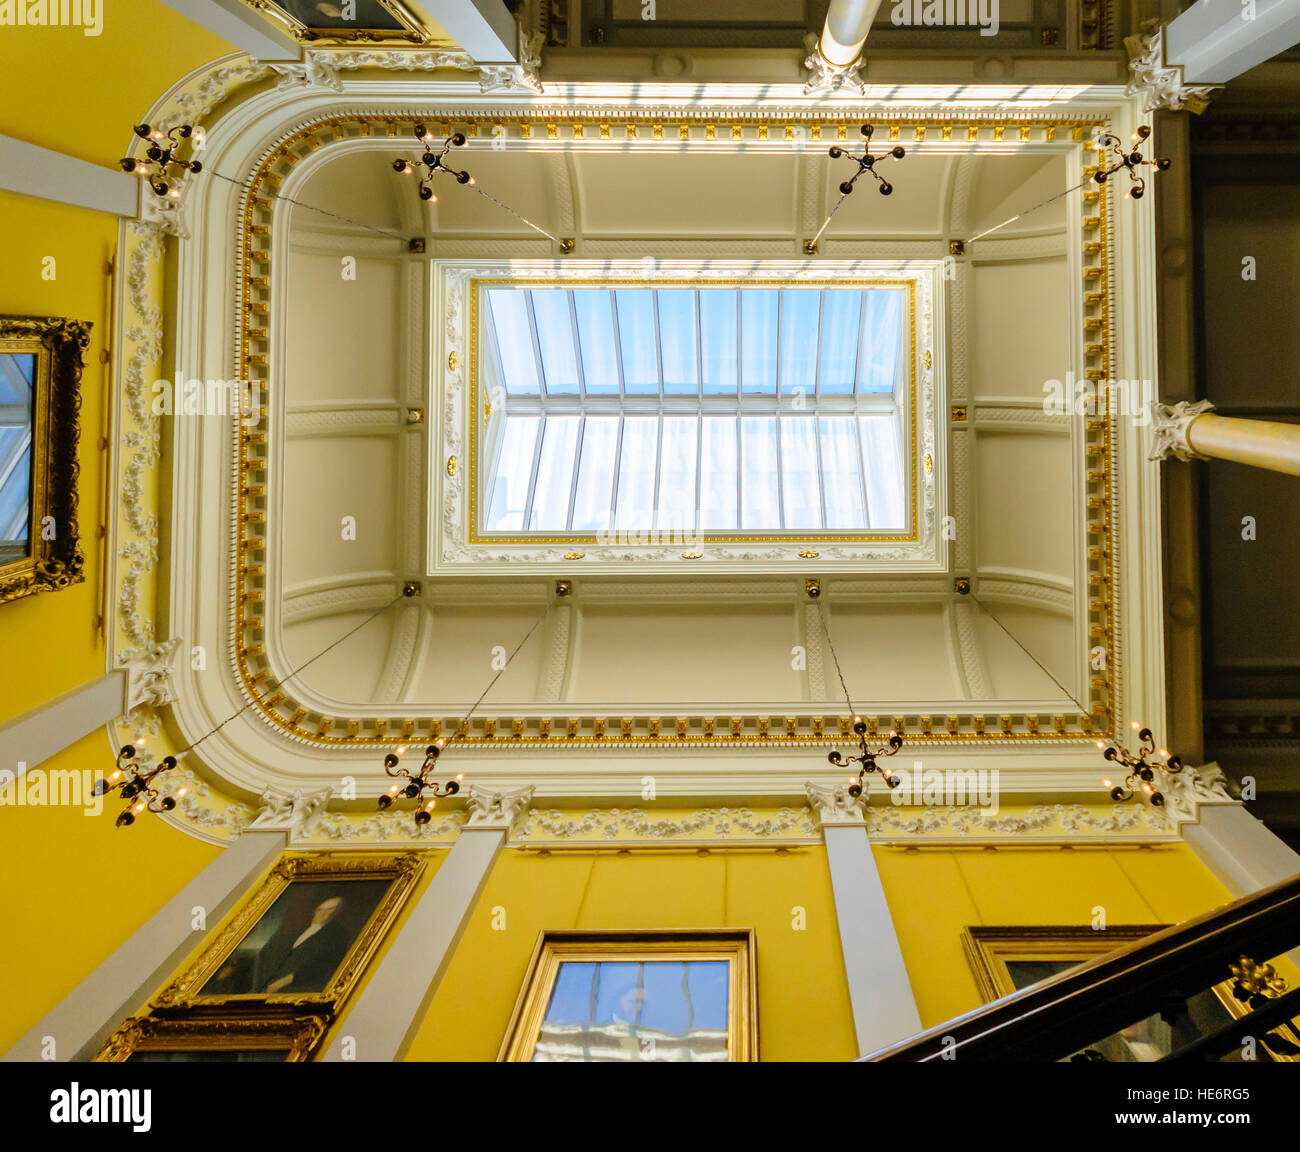 Skylight on the roof above a staircase in an ornate building. Stock Photo